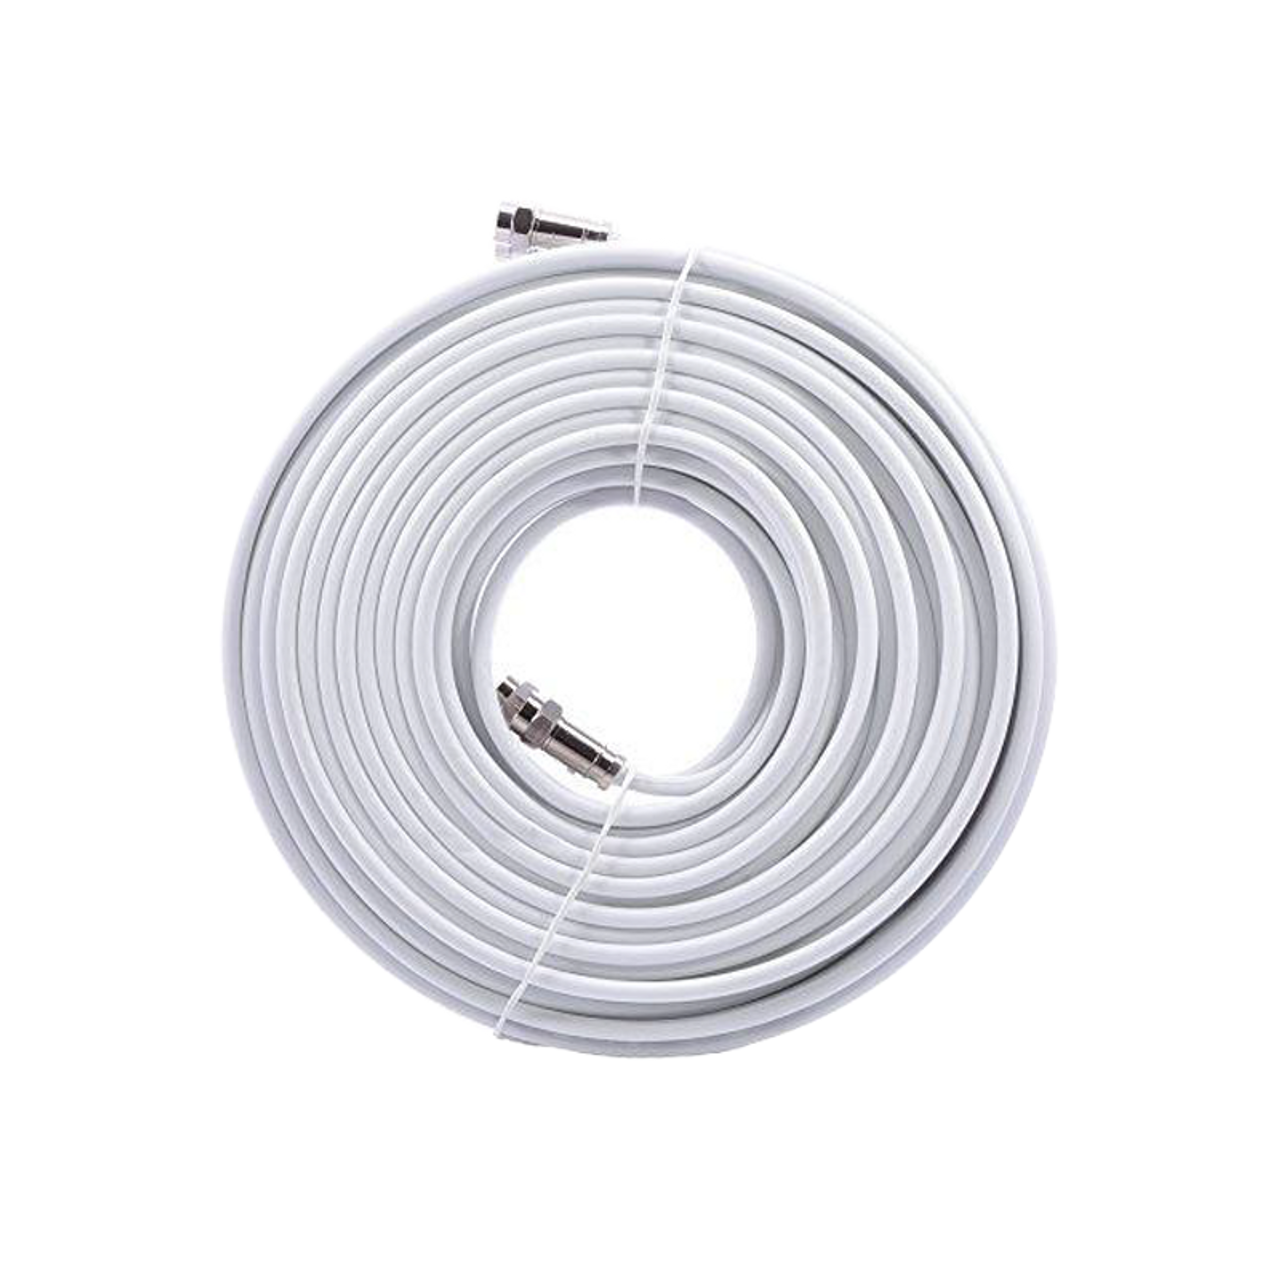 Sphere 1.5M Rg6 Quad Shield Coax With Compression Fittings. C4418F | 900-05580